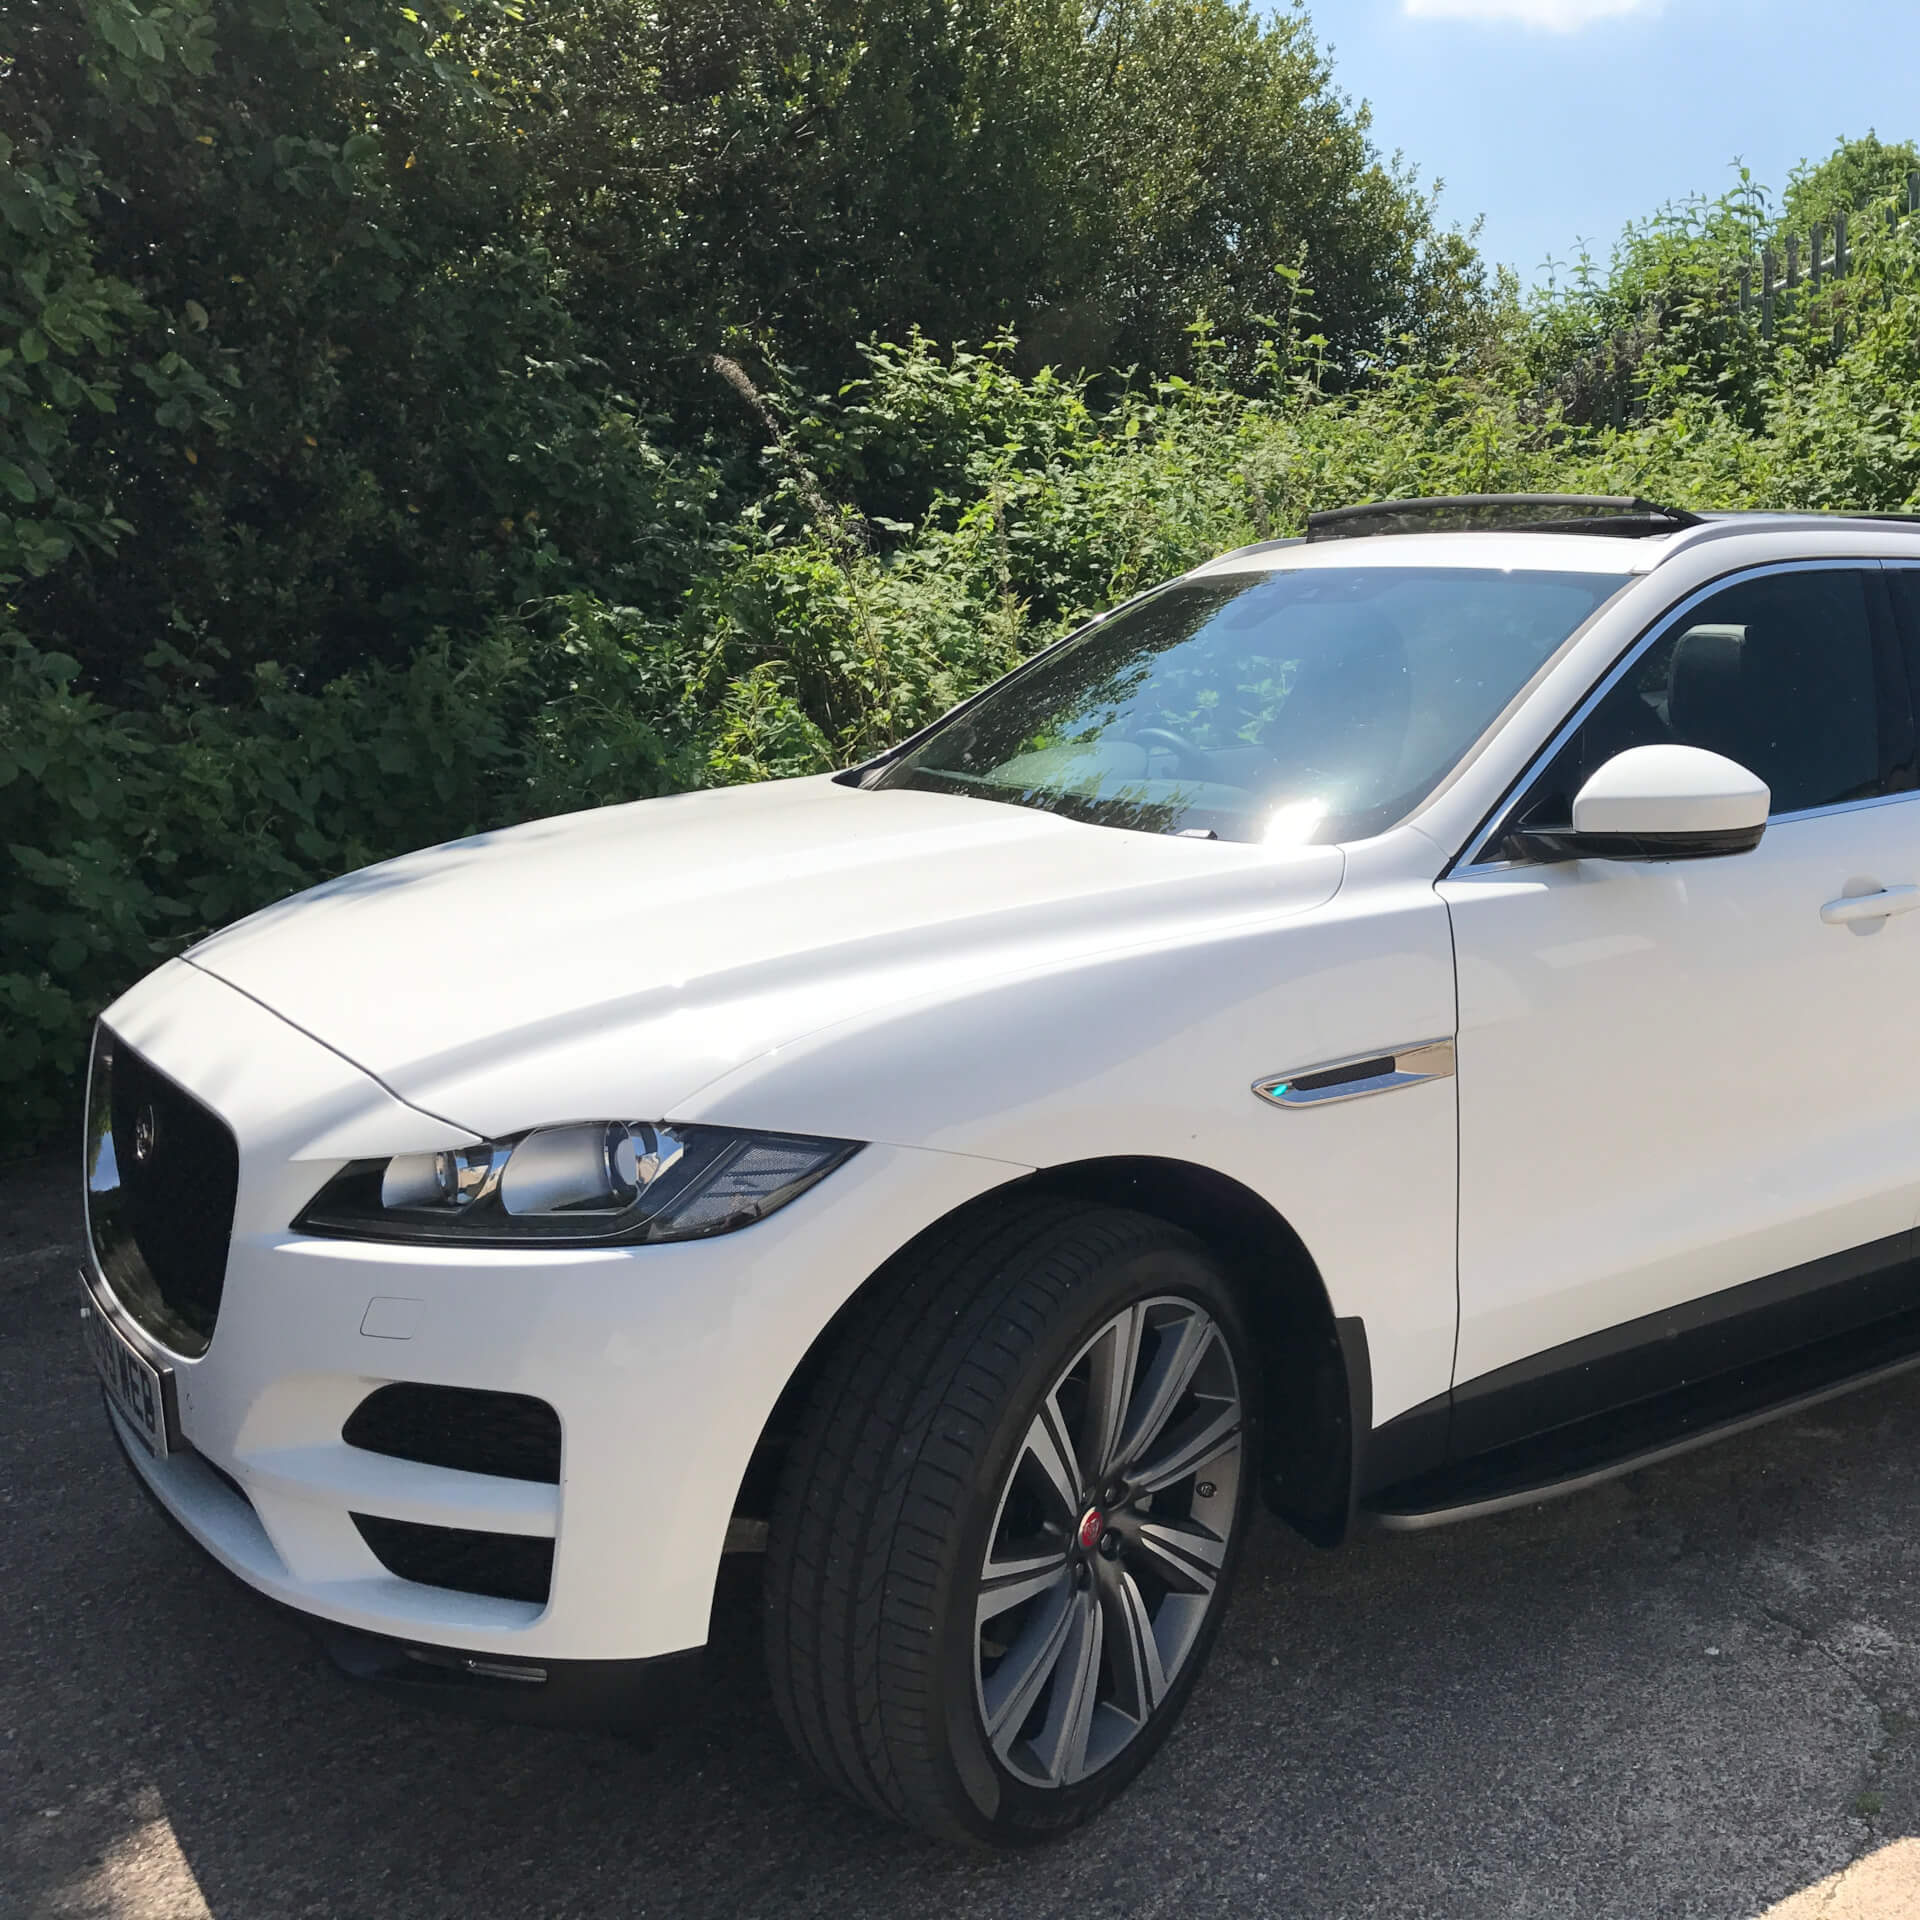 Direct4x4 accessories for Jaguar F-Pace vehicles with a photo of a white Jaguar F-Pace parked in front of greenery in the sunshine